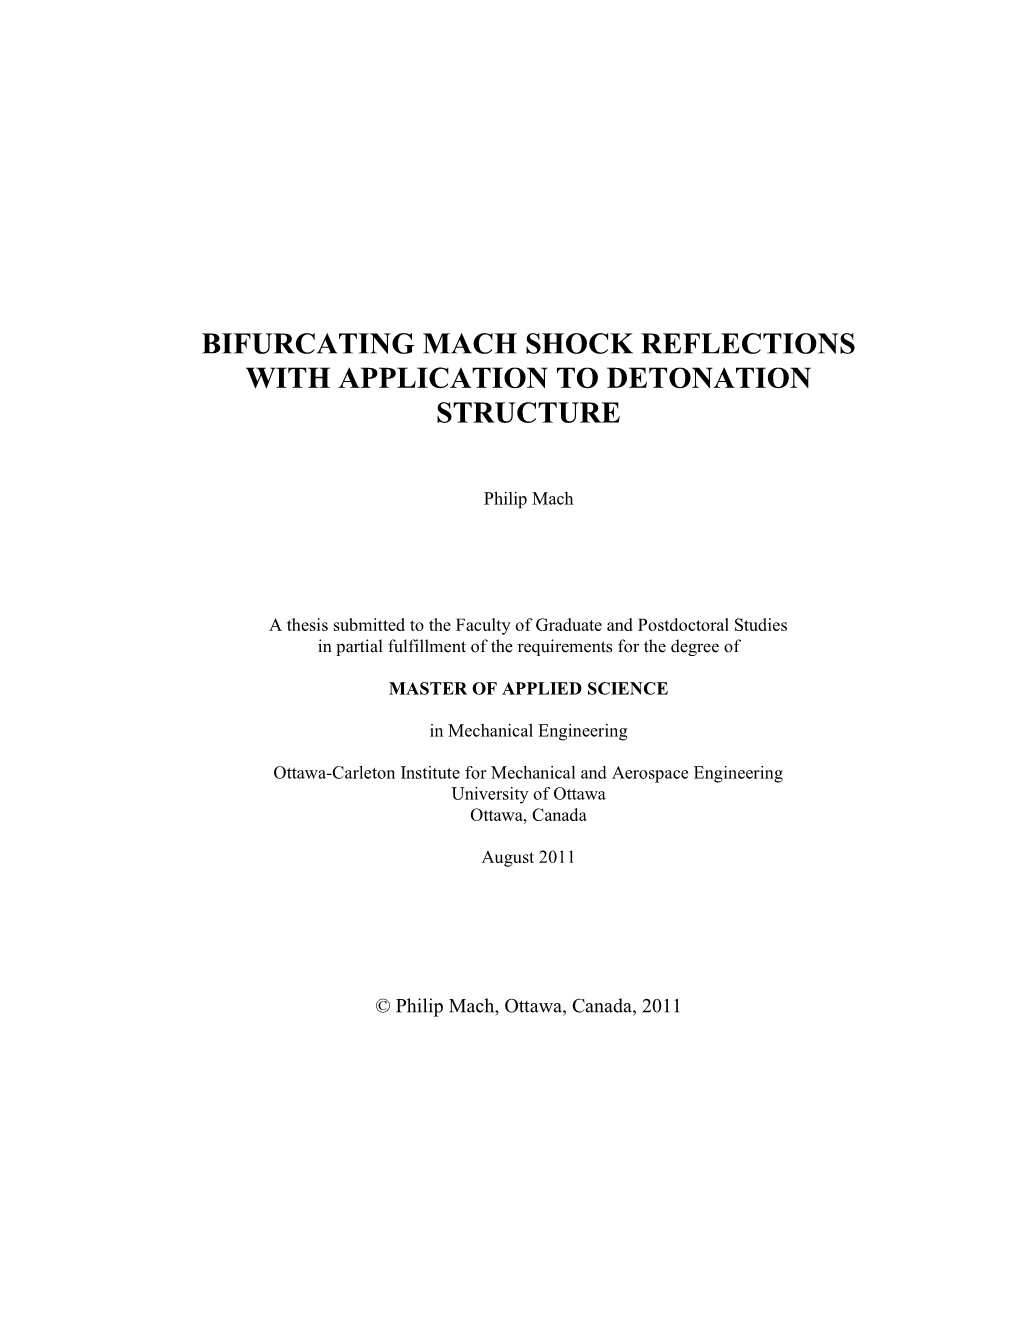 Bifurcating Mach Shock Reflections with Application to Detonation Structure